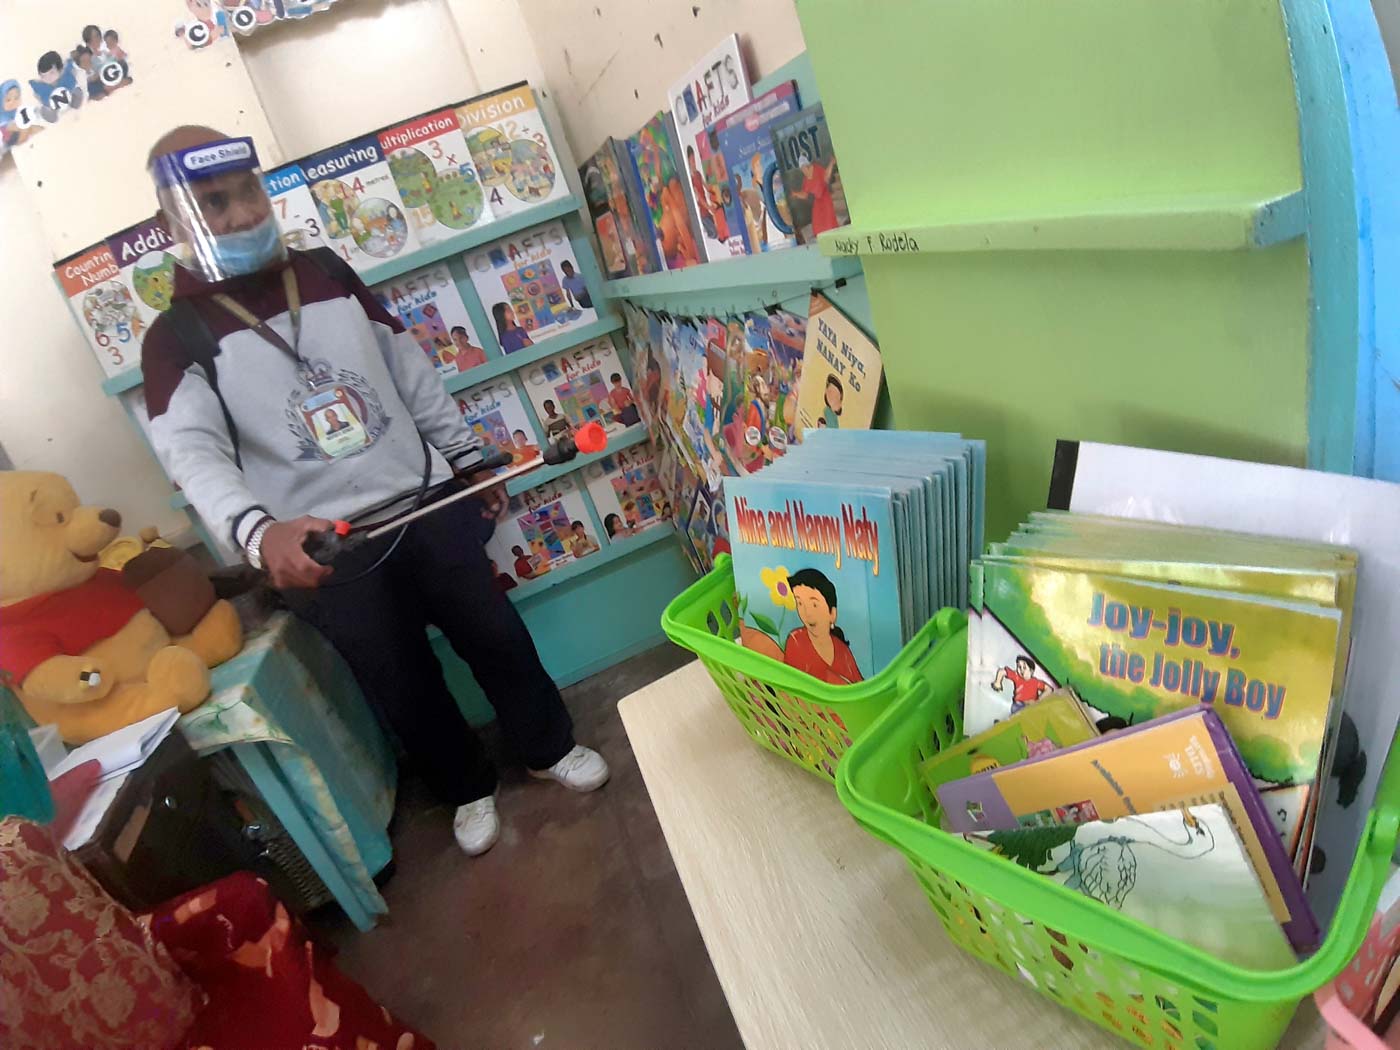 PREPARATION. A teacher at the Mabini Elementary School in Baguio City prepares emergency kits for students and disinfects the premises to prevent transmission of the coronavirus. Photo by Mau Victa/Rappler 